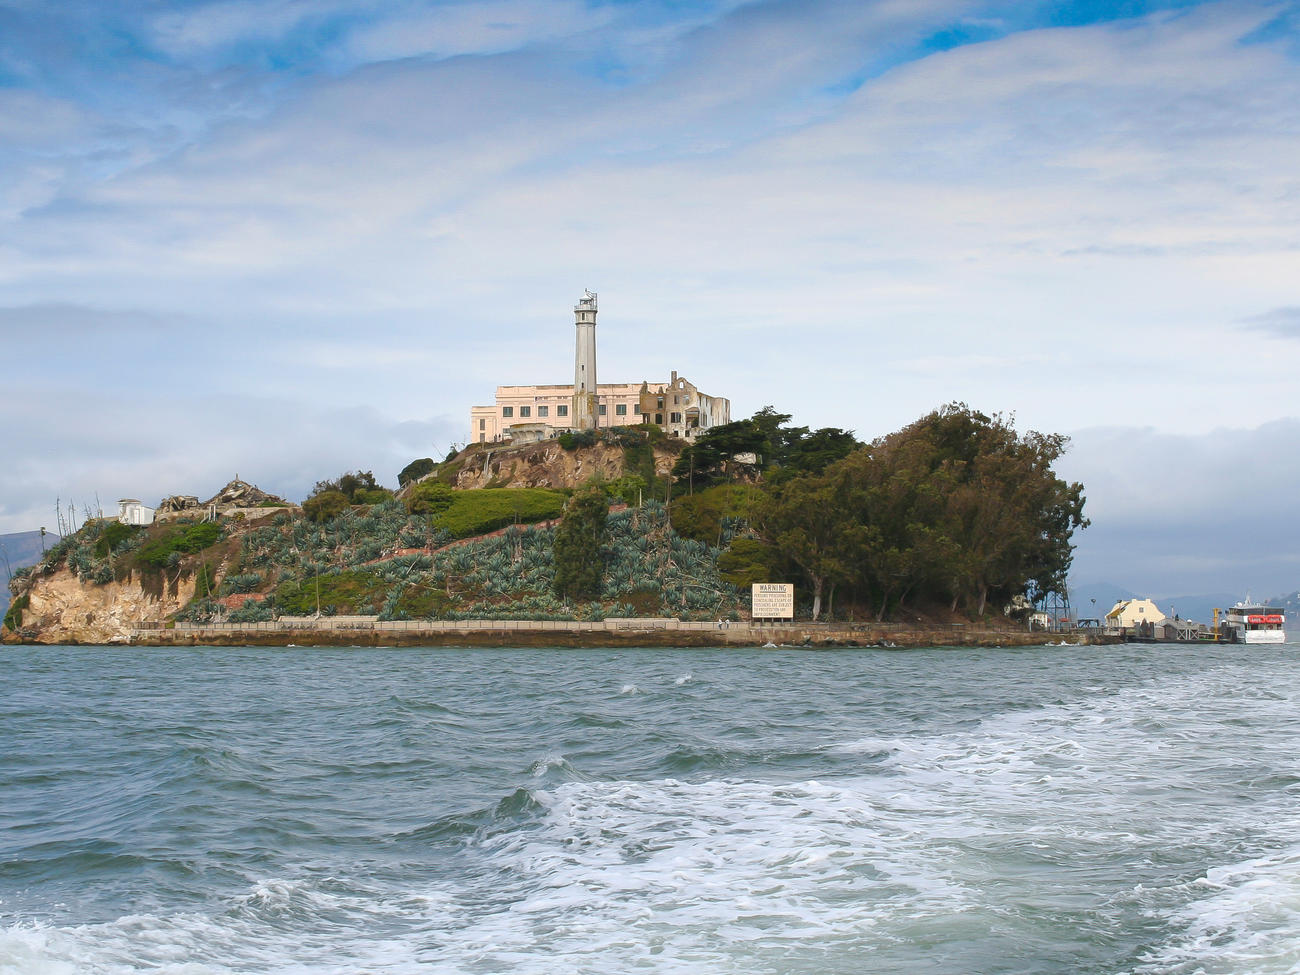 Travelers to Alcatraz Now Have the Option to Visit a Second Island